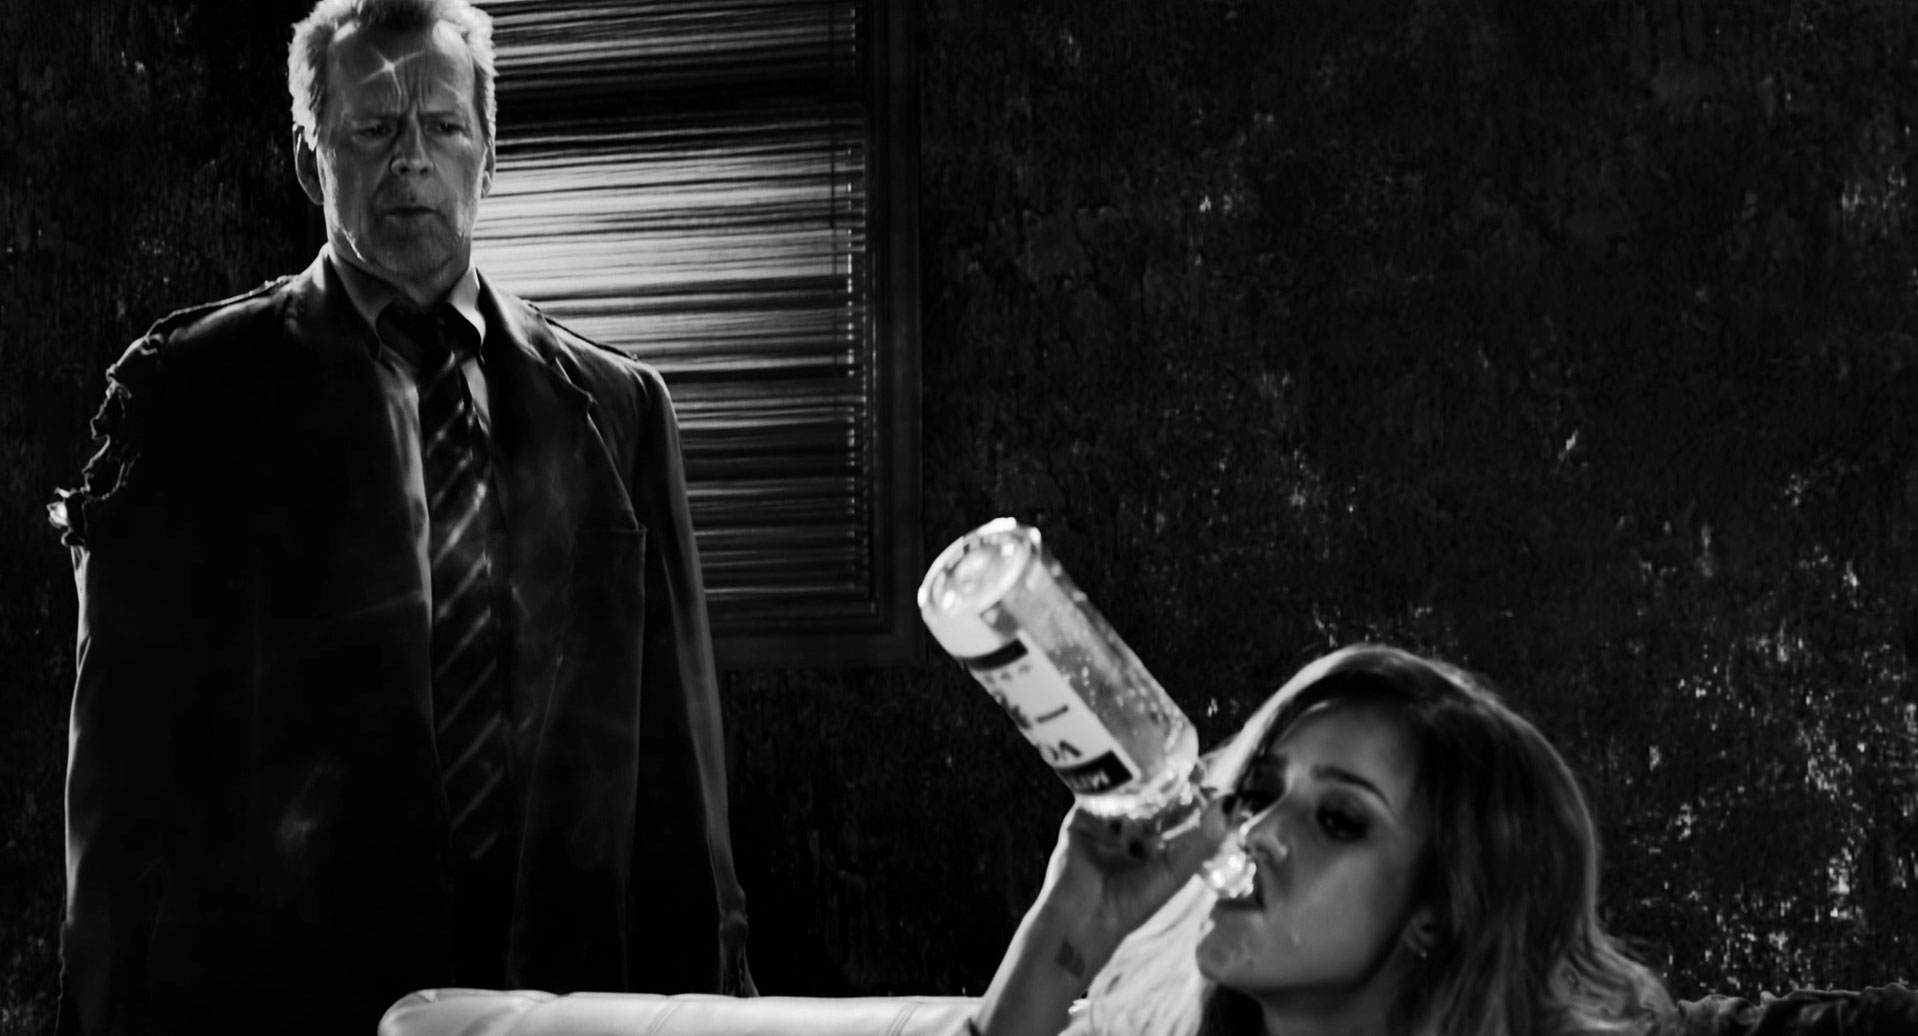 Bruce Willis in Sin City: A Dame to Kill For